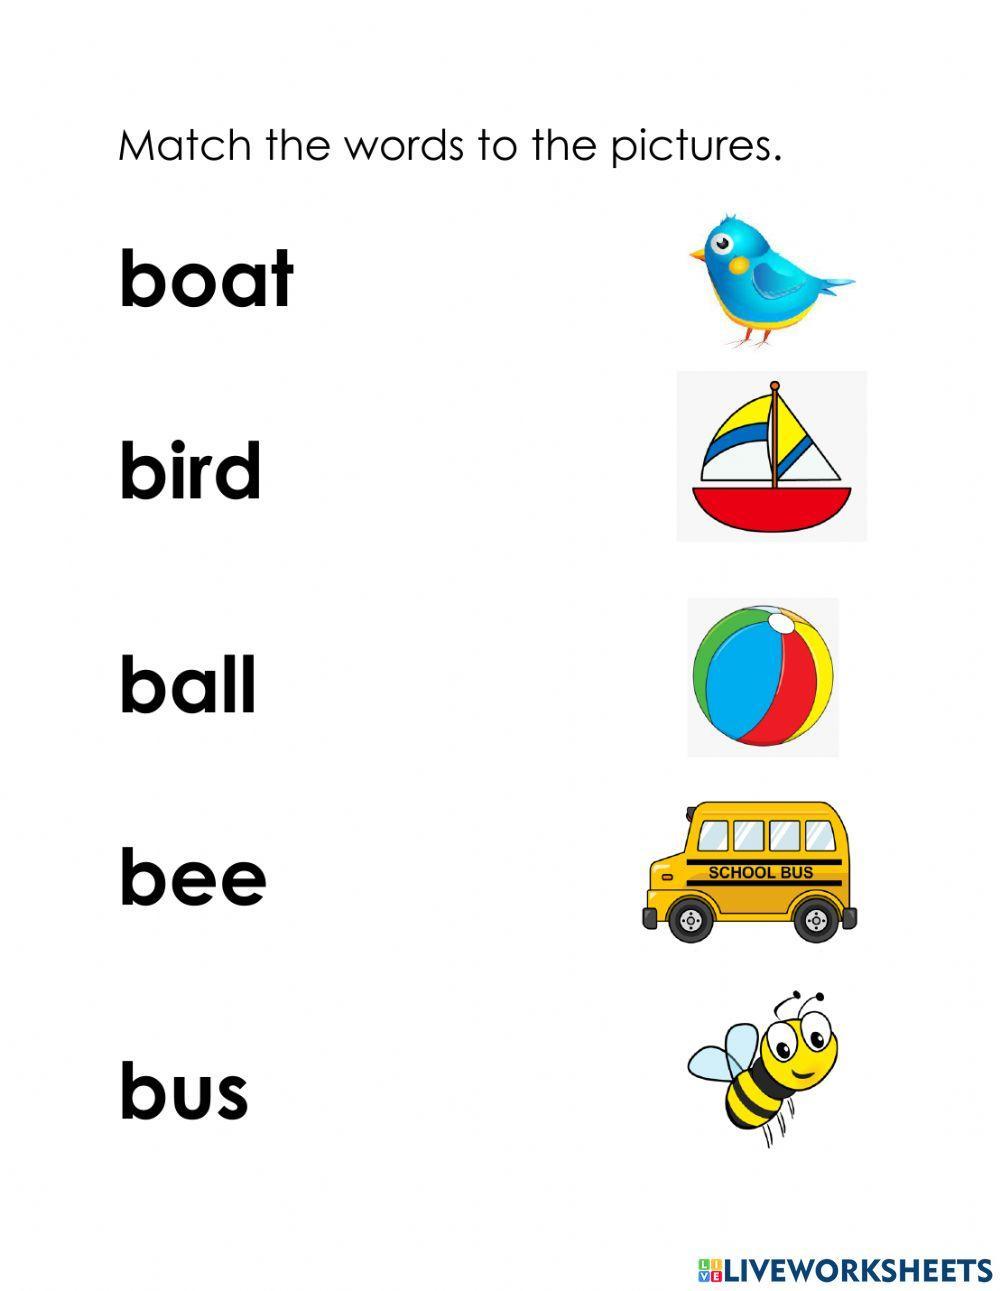 Match the words starting with b